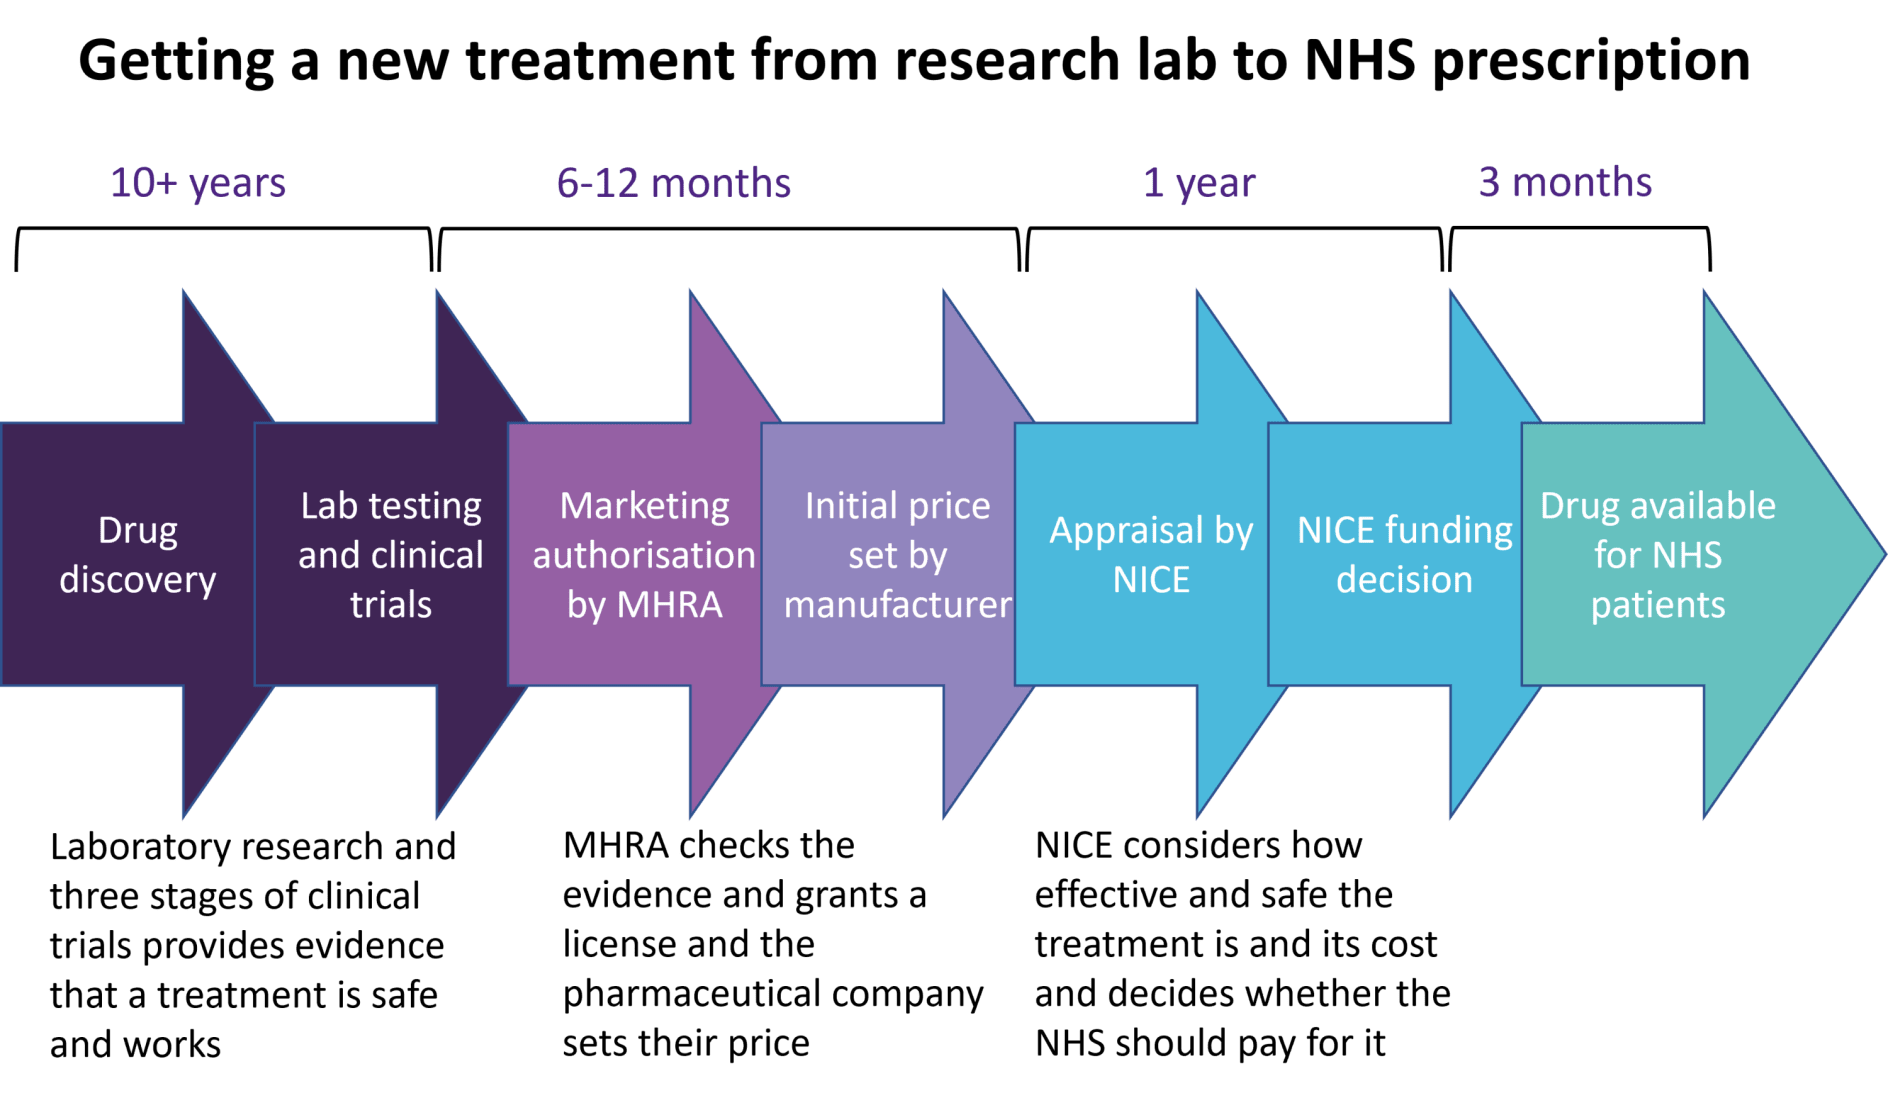 Timeline of stages in drug approval process (England)